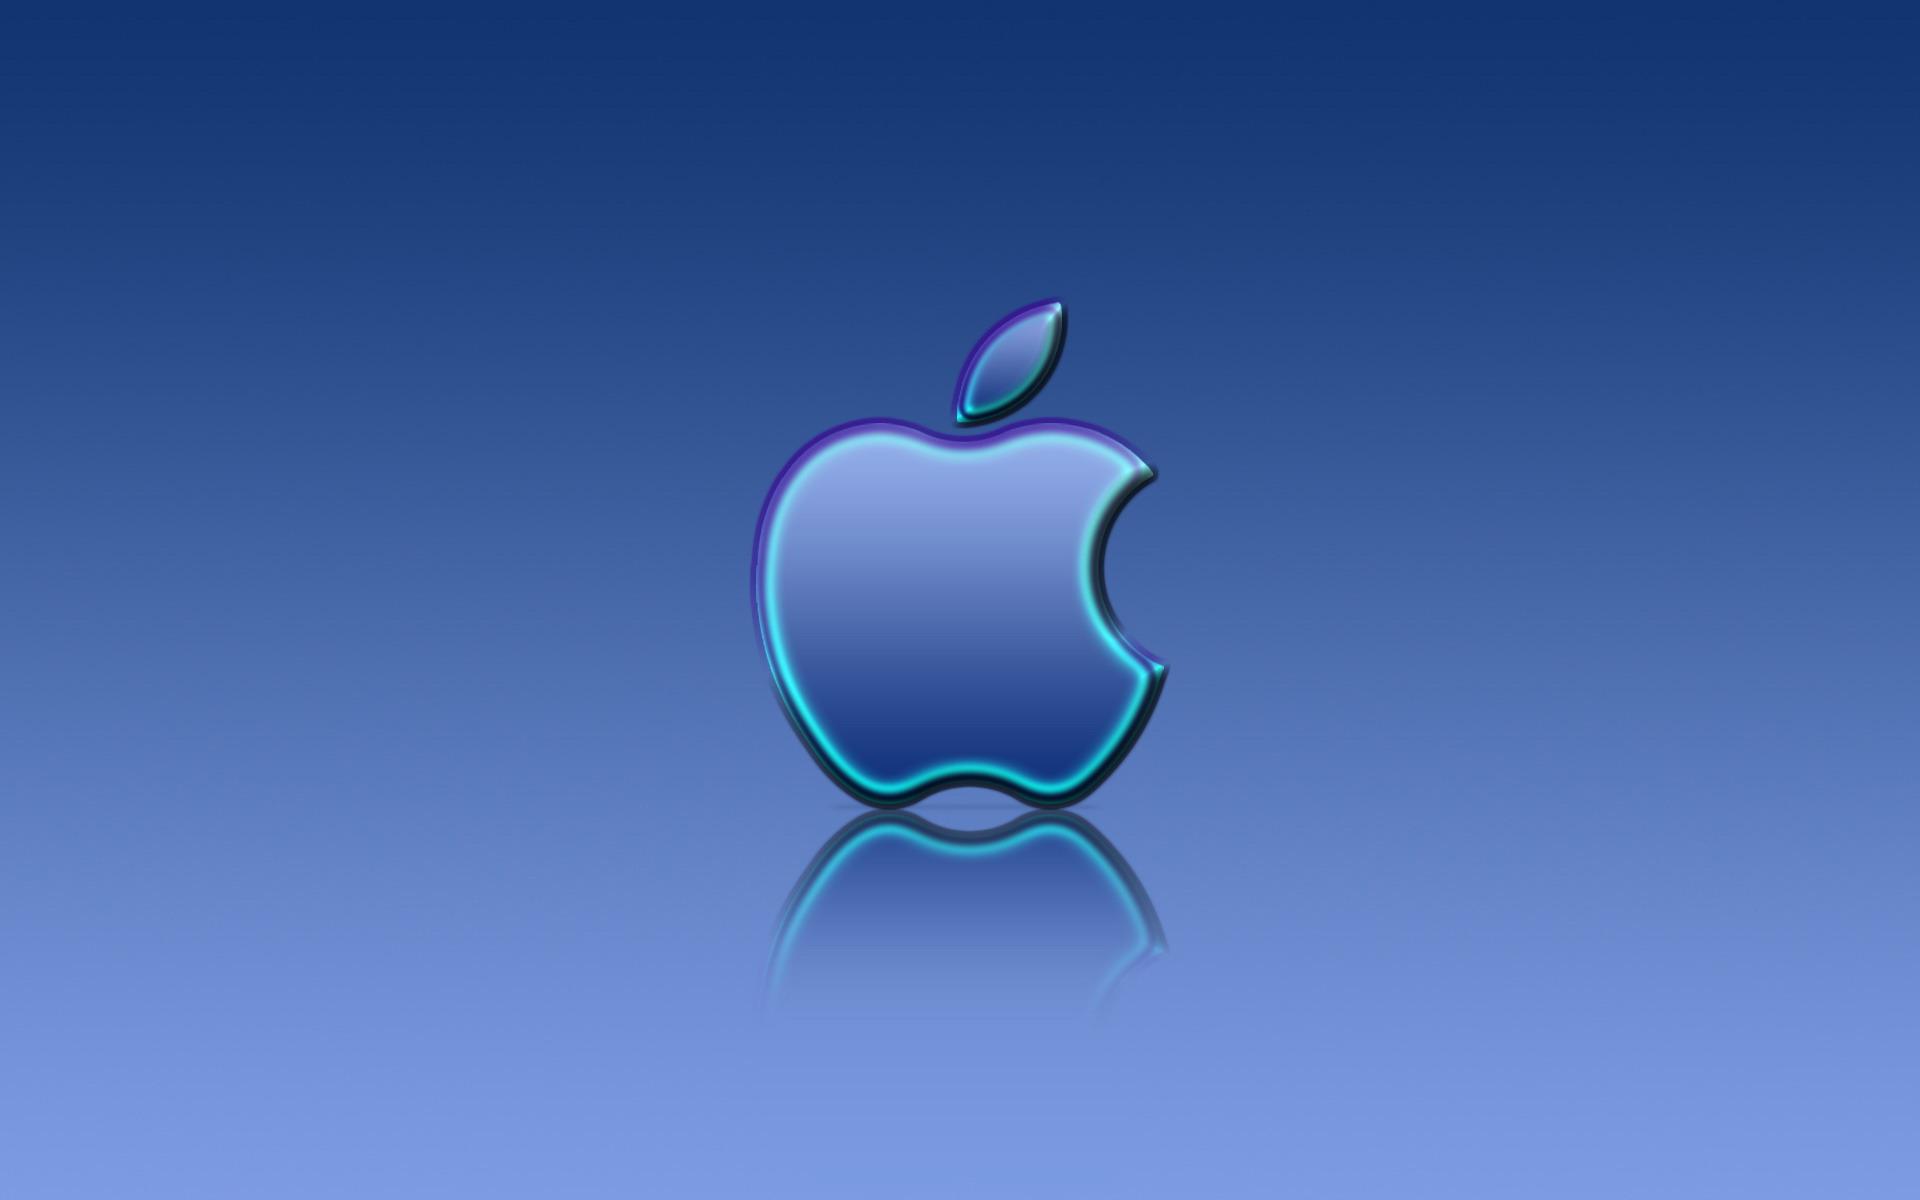 Blue Apple Wallpapers - Wallpaper Cave